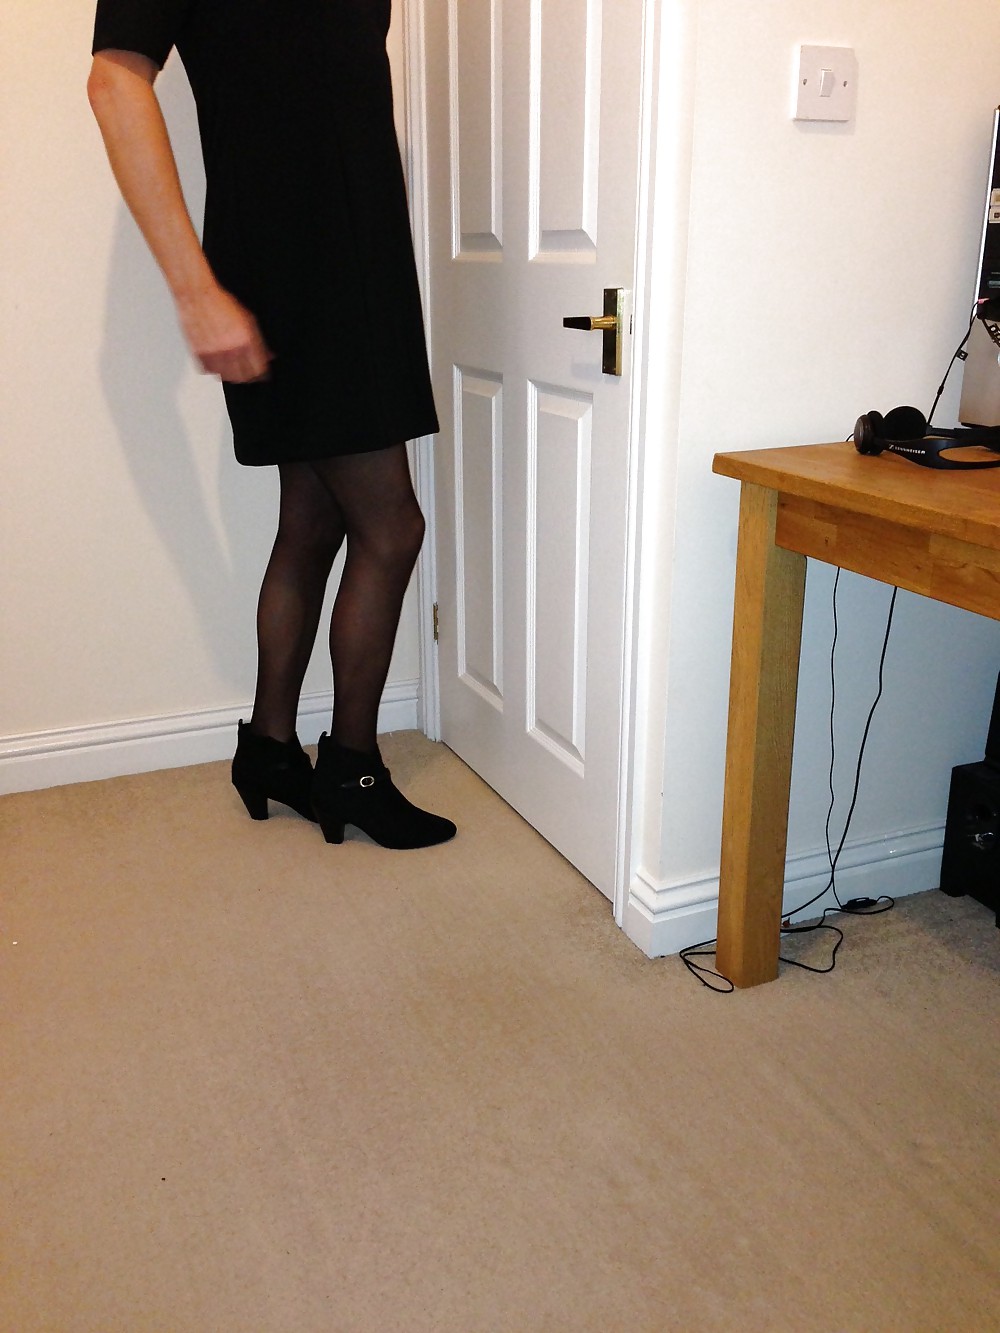 Sex new little black dress and stockings image